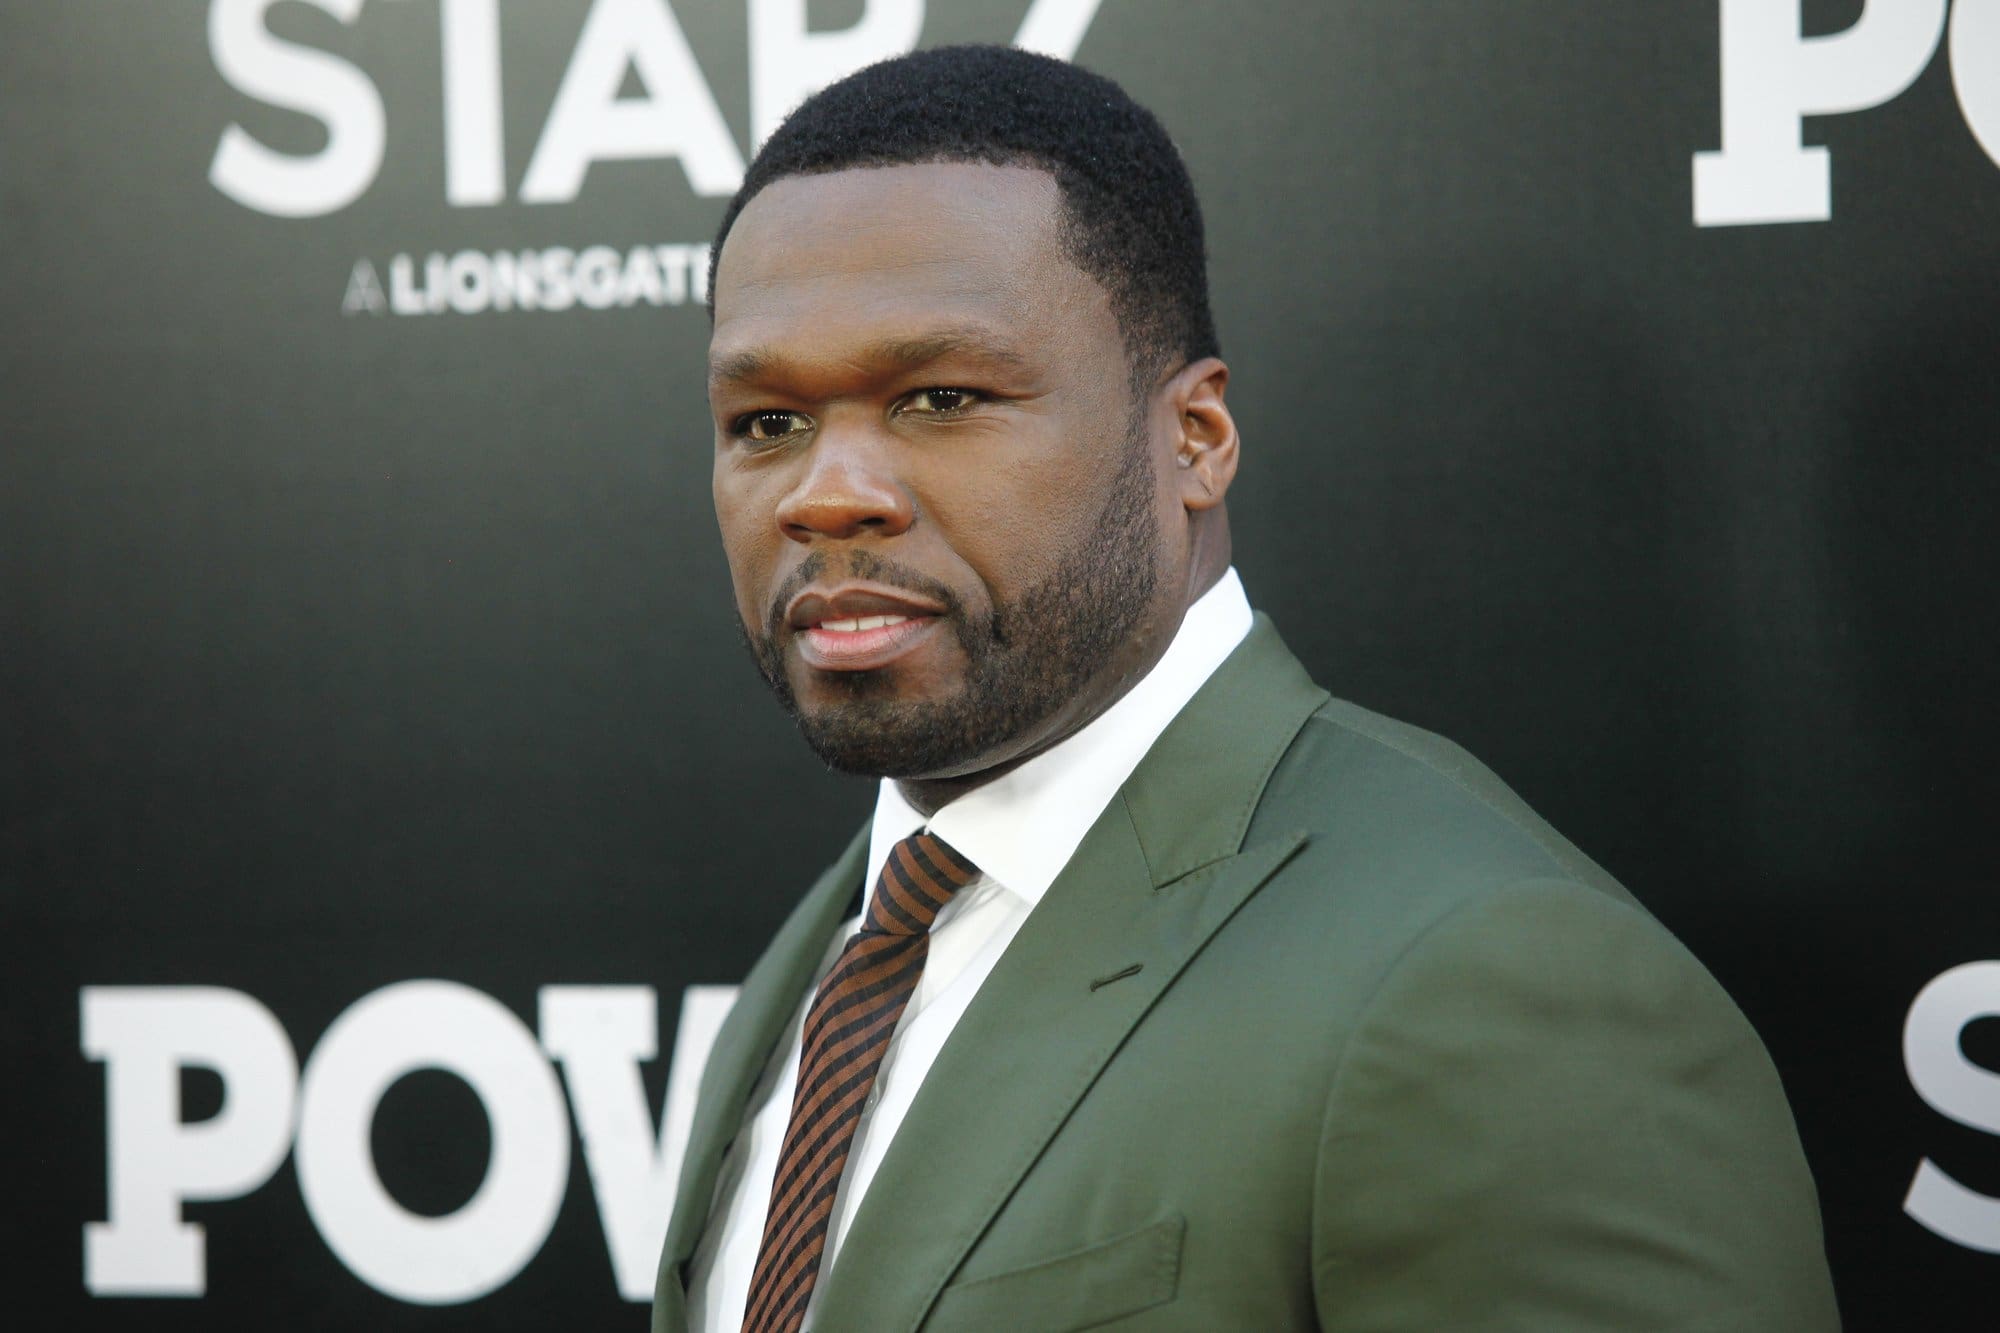 50 Cent Enrages People With Offensive ’Trans-Slender’ Meme Post ...